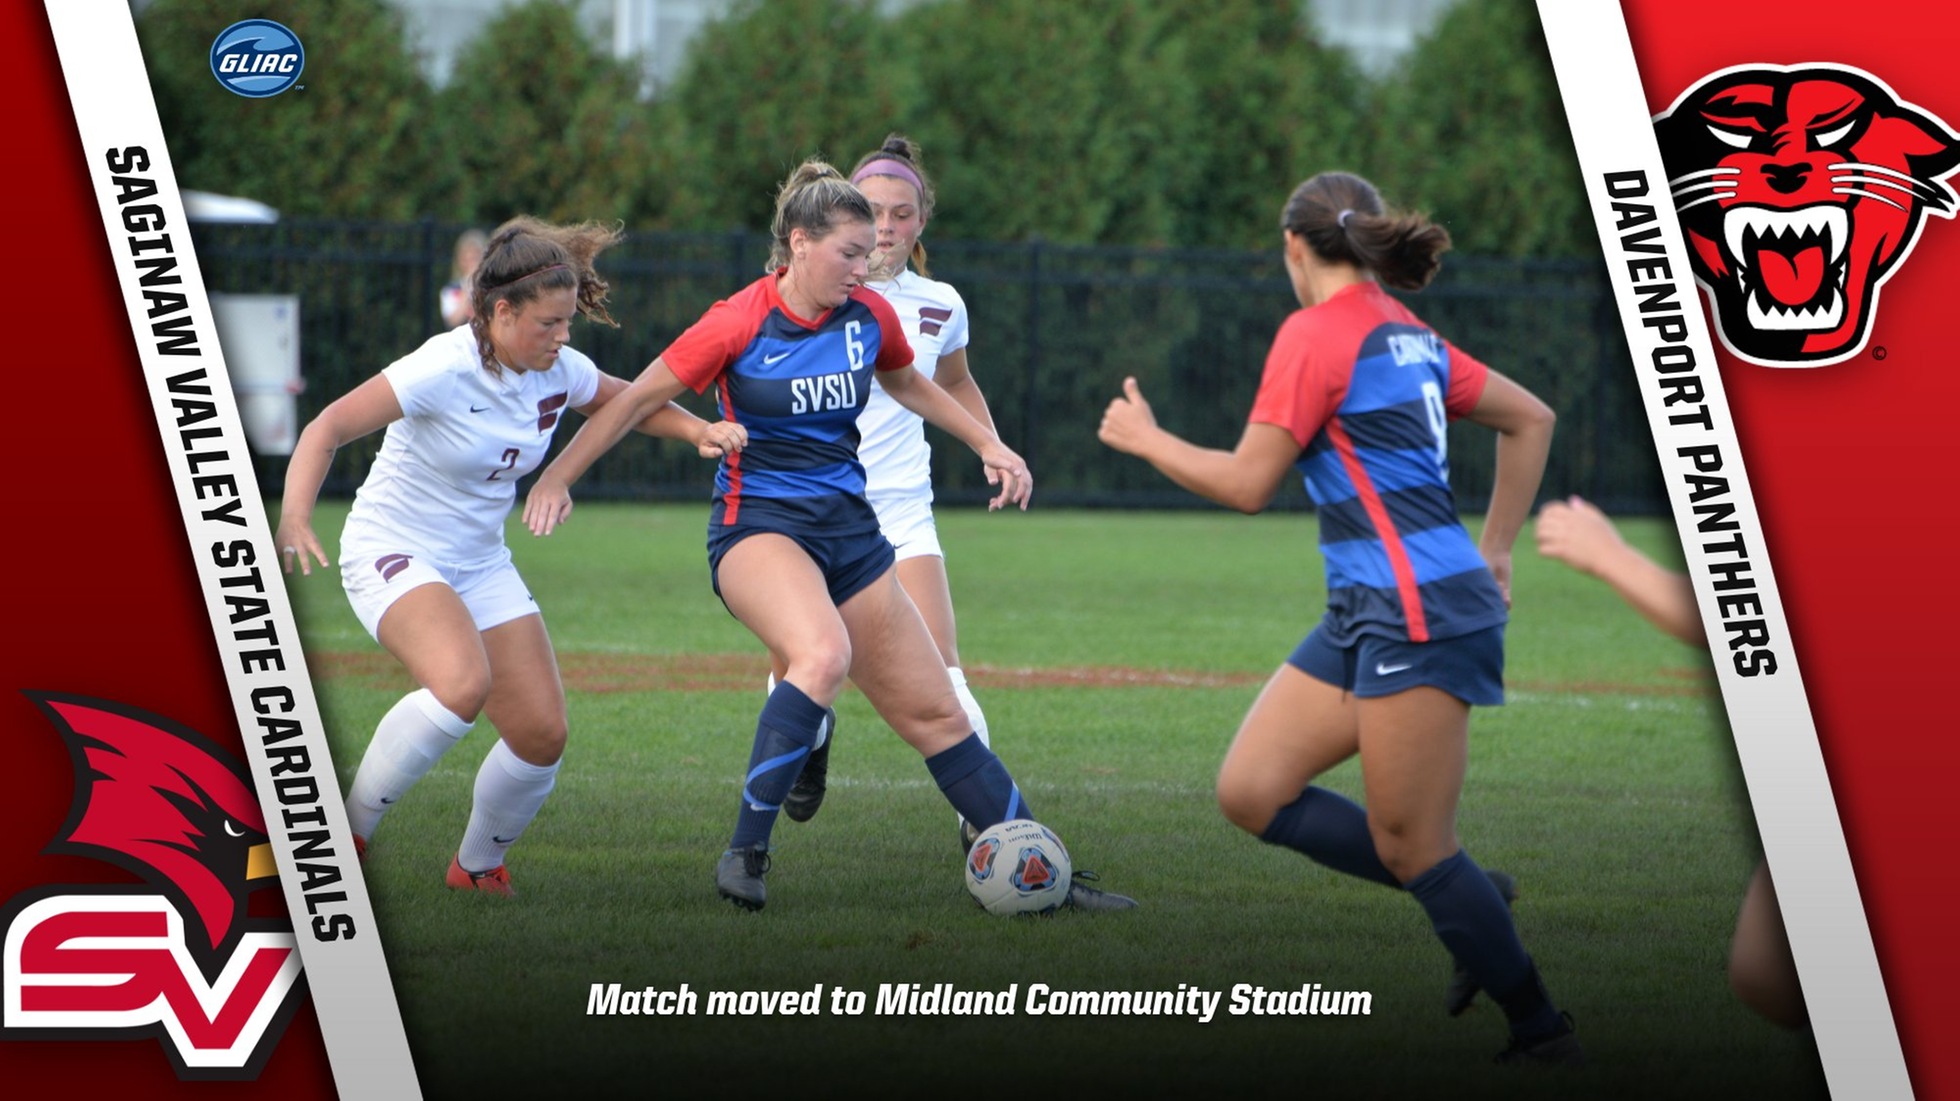 Friday's Women's Soccer match versus Davenport moved to Midland